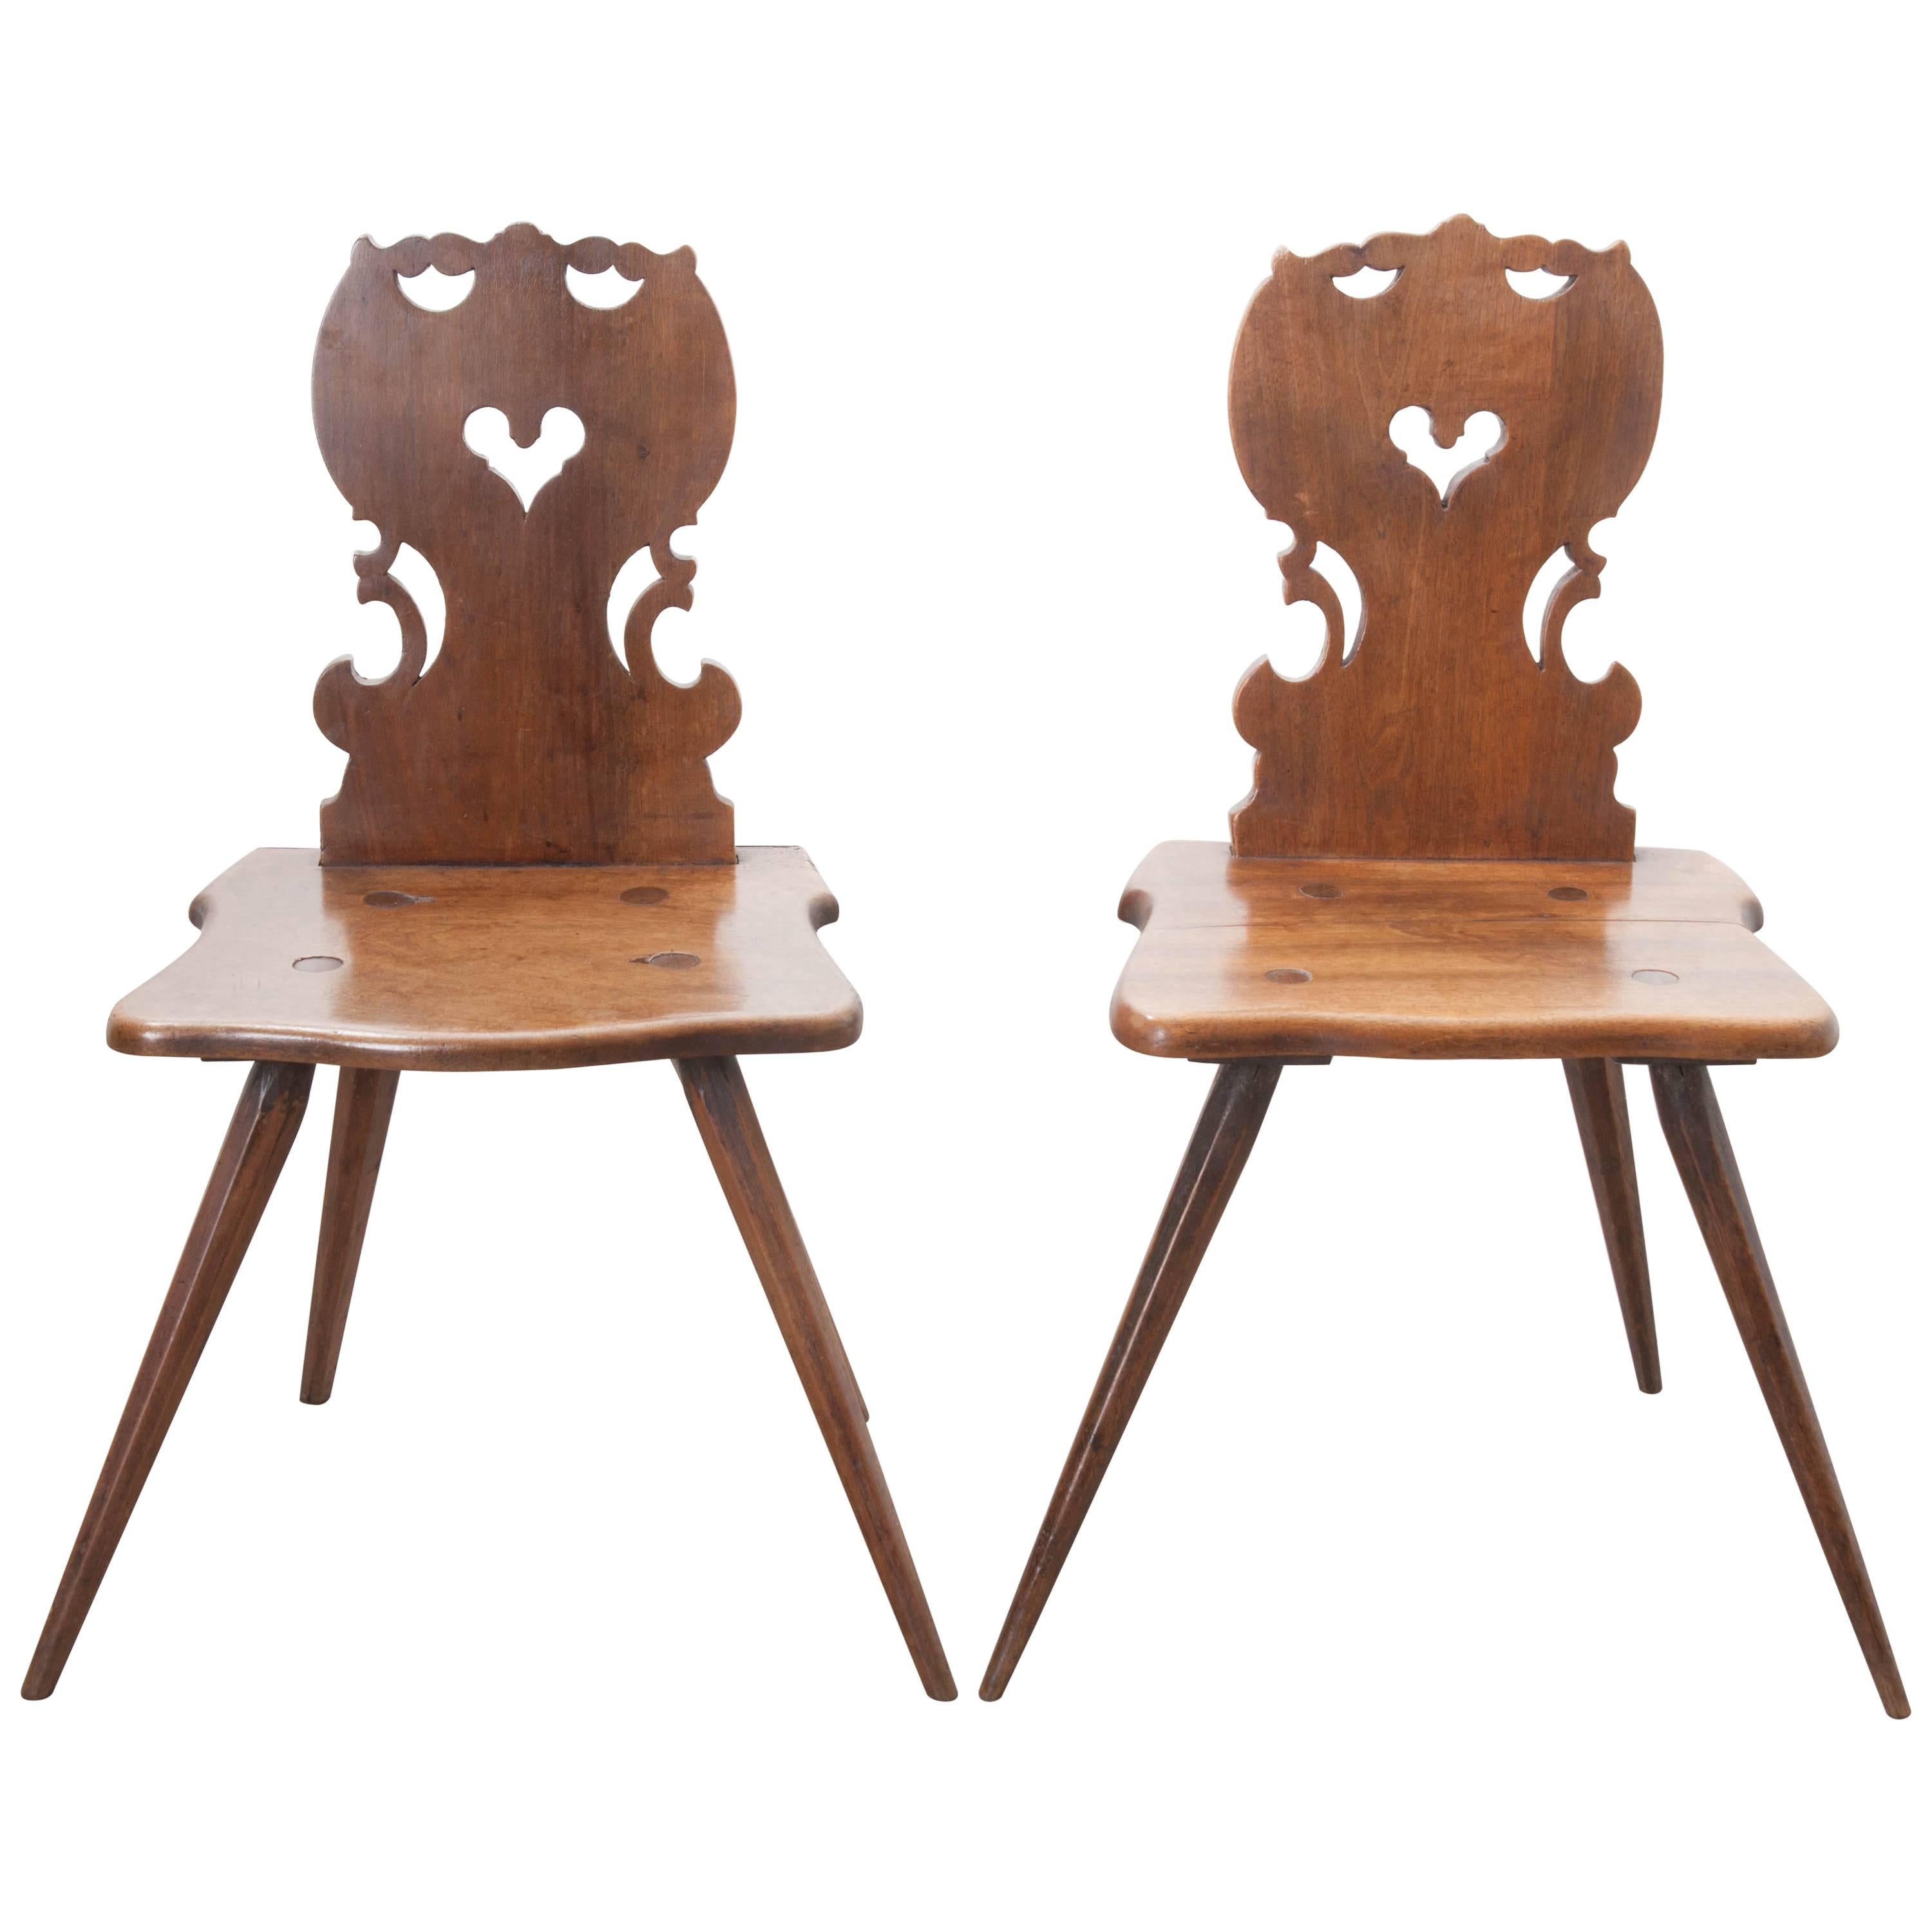 Pair of Early 19th Century Hand-Carved Alsatian Chairs